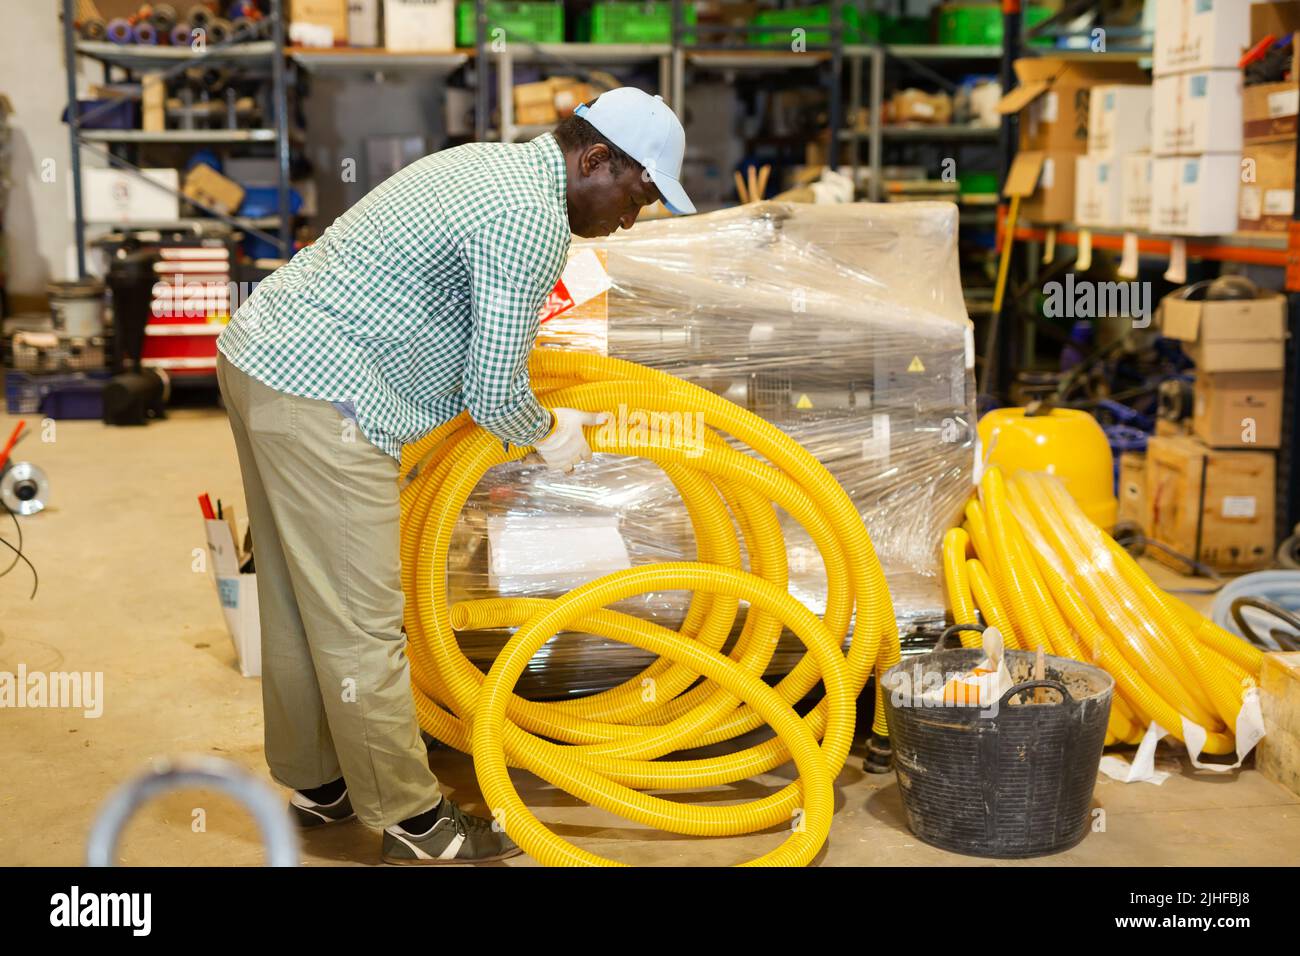 Portrait of focused African American man buying hoses Stock Photo